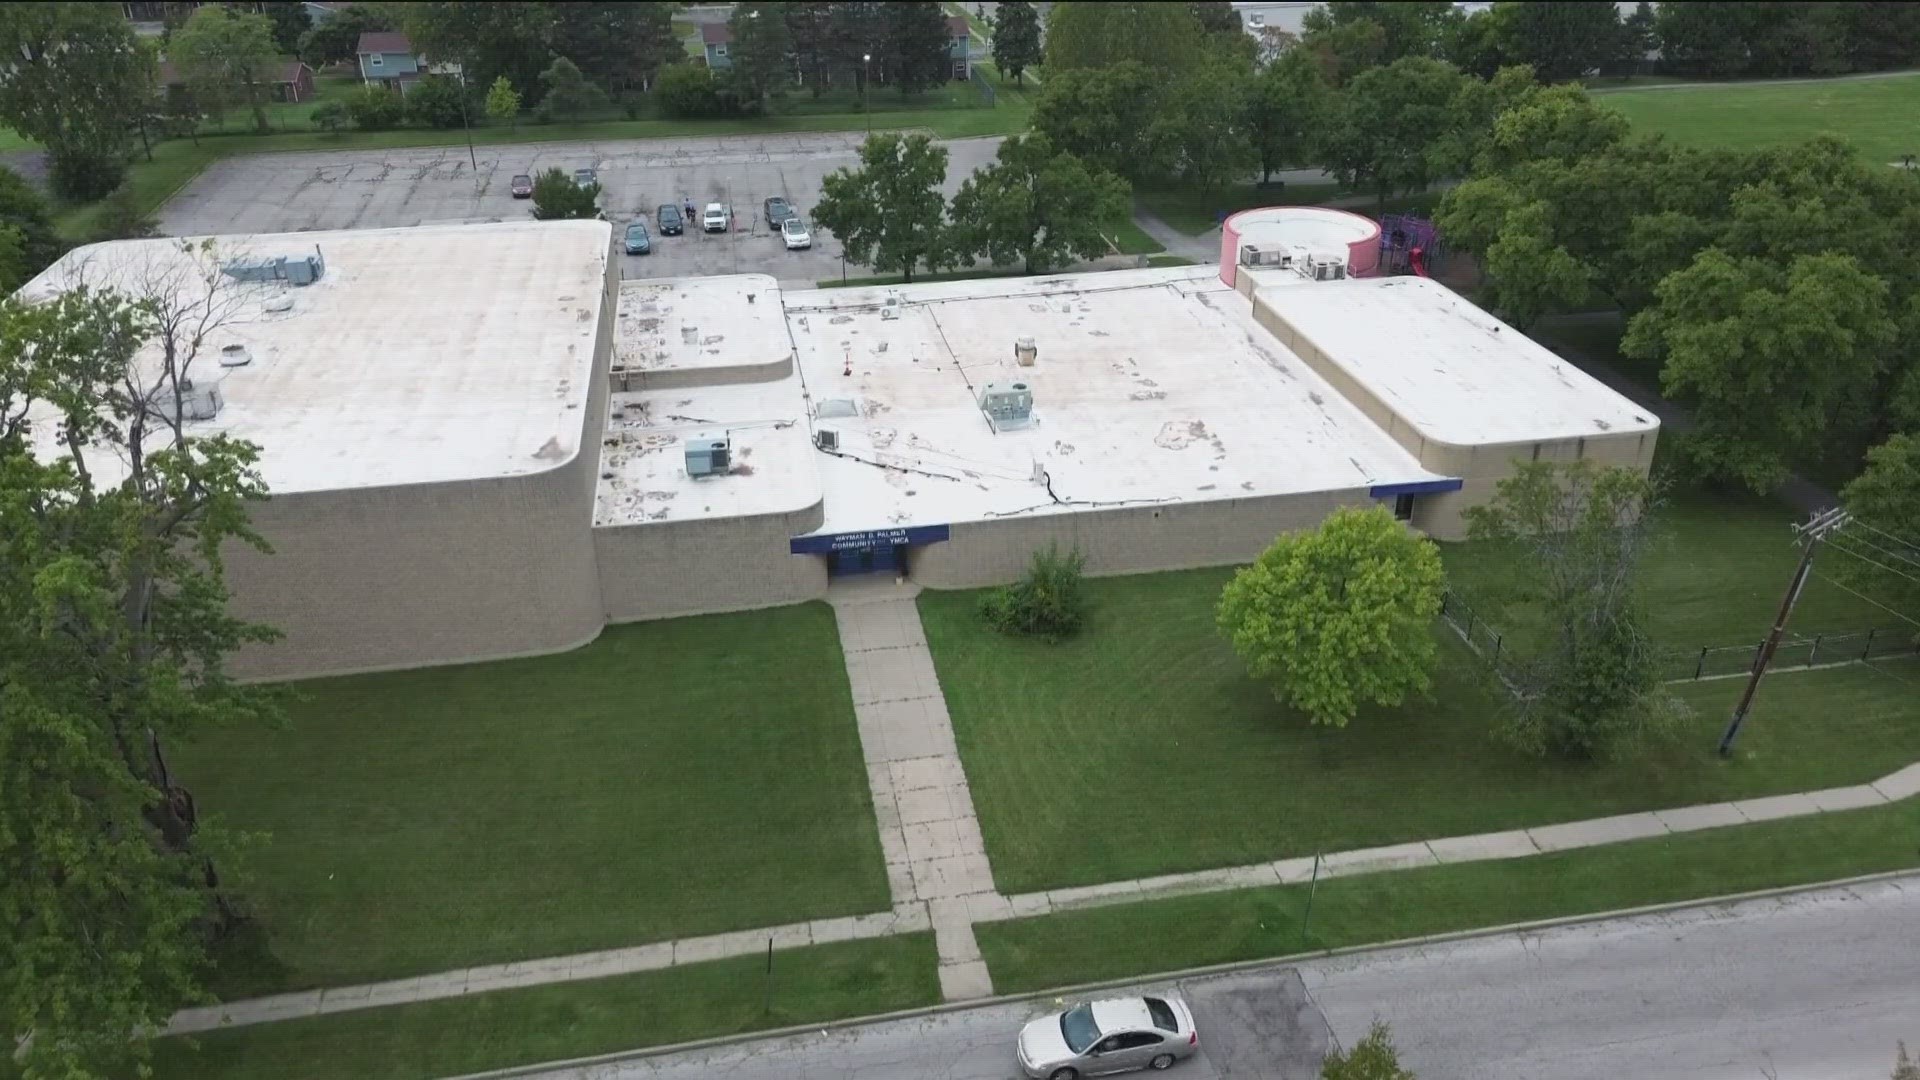 Residents of the Warren Sherman neighborhood told WTOL 11 that a new YMCA is long overdue.